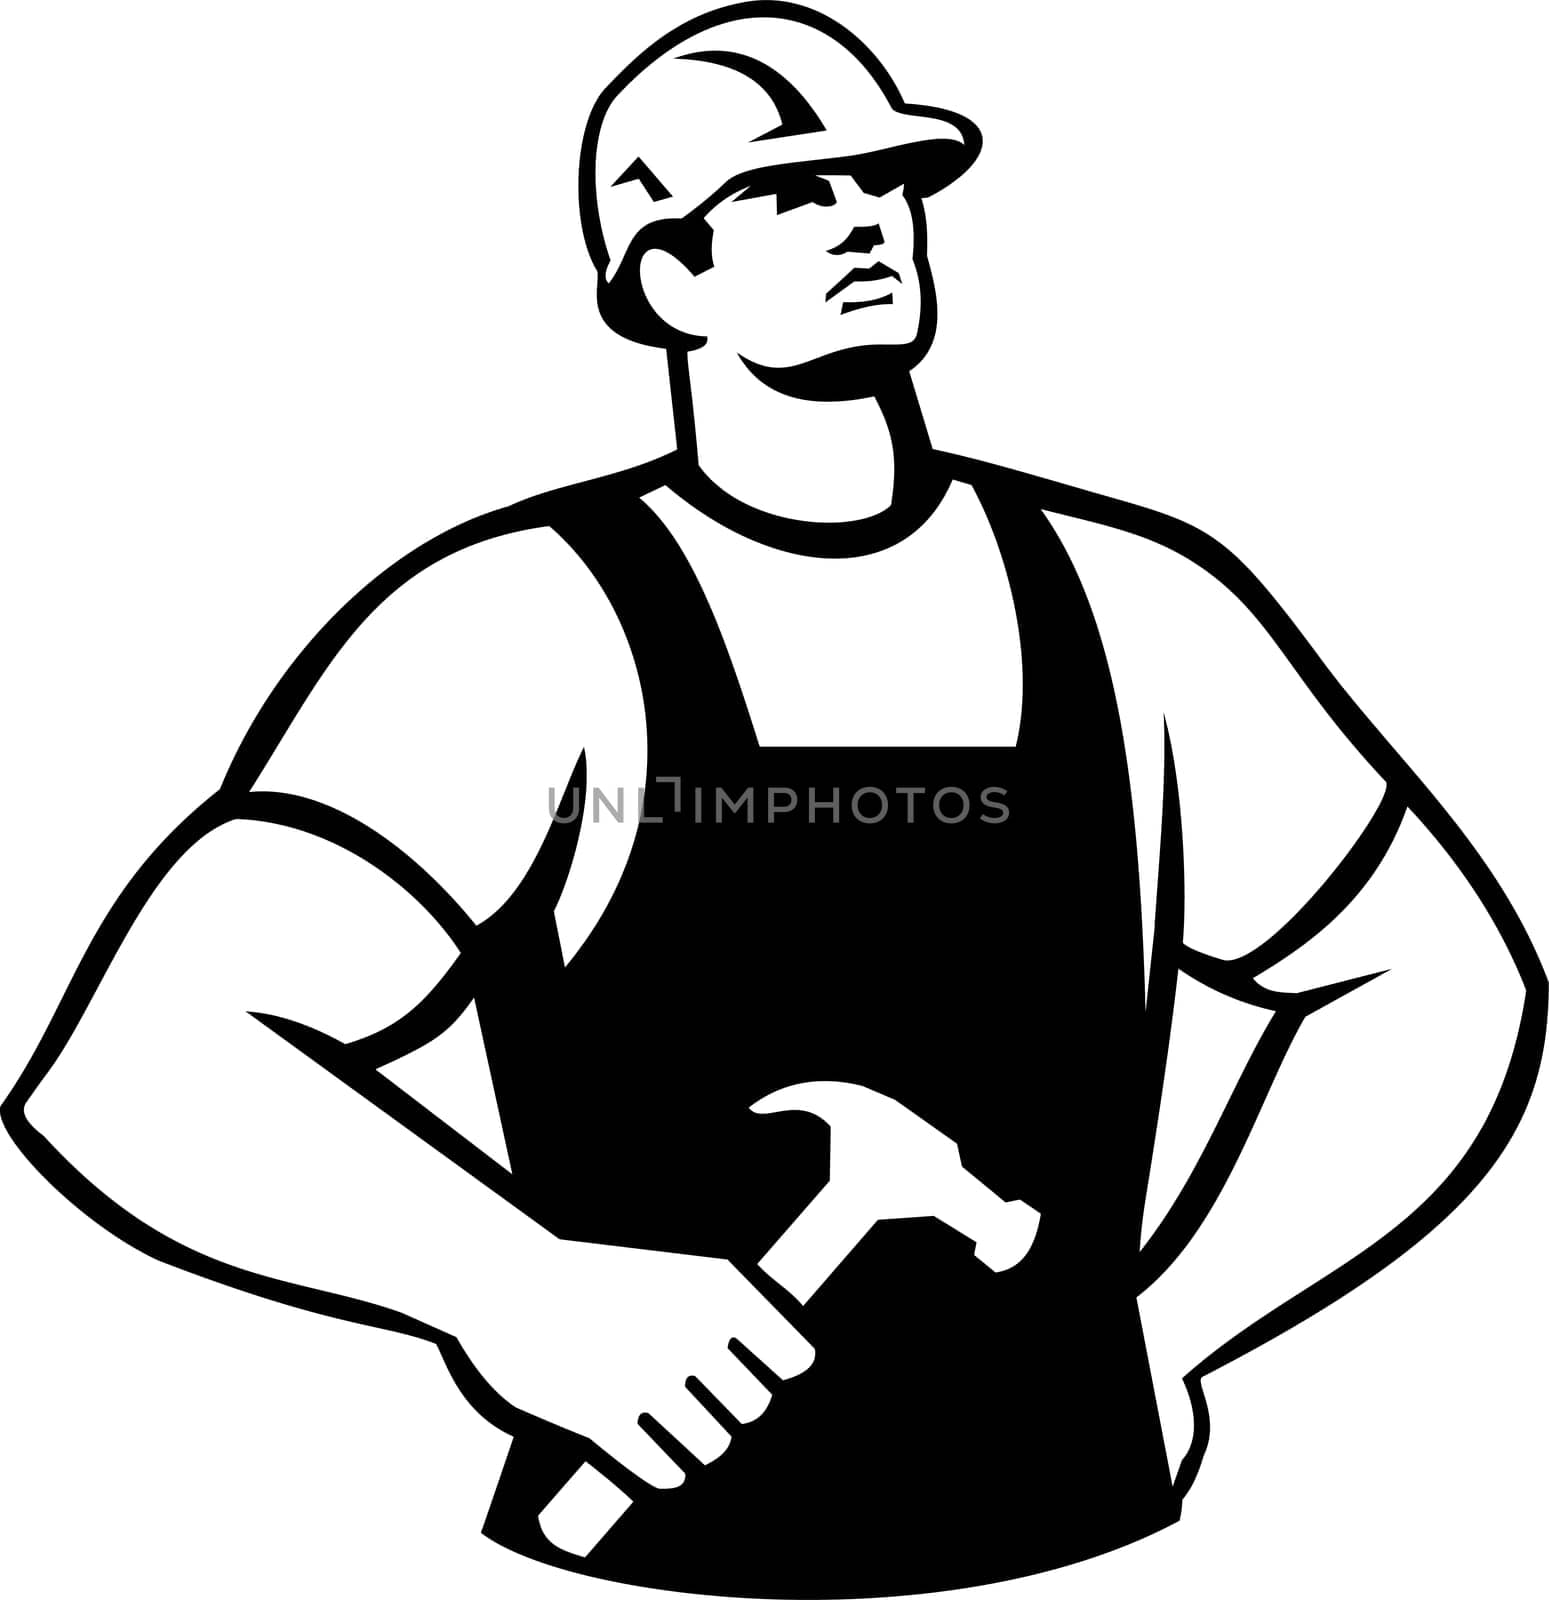 Retro style illustration of a carpenter handyman holding a claw hammer looking up viewed from front on isolated background done in black and white.